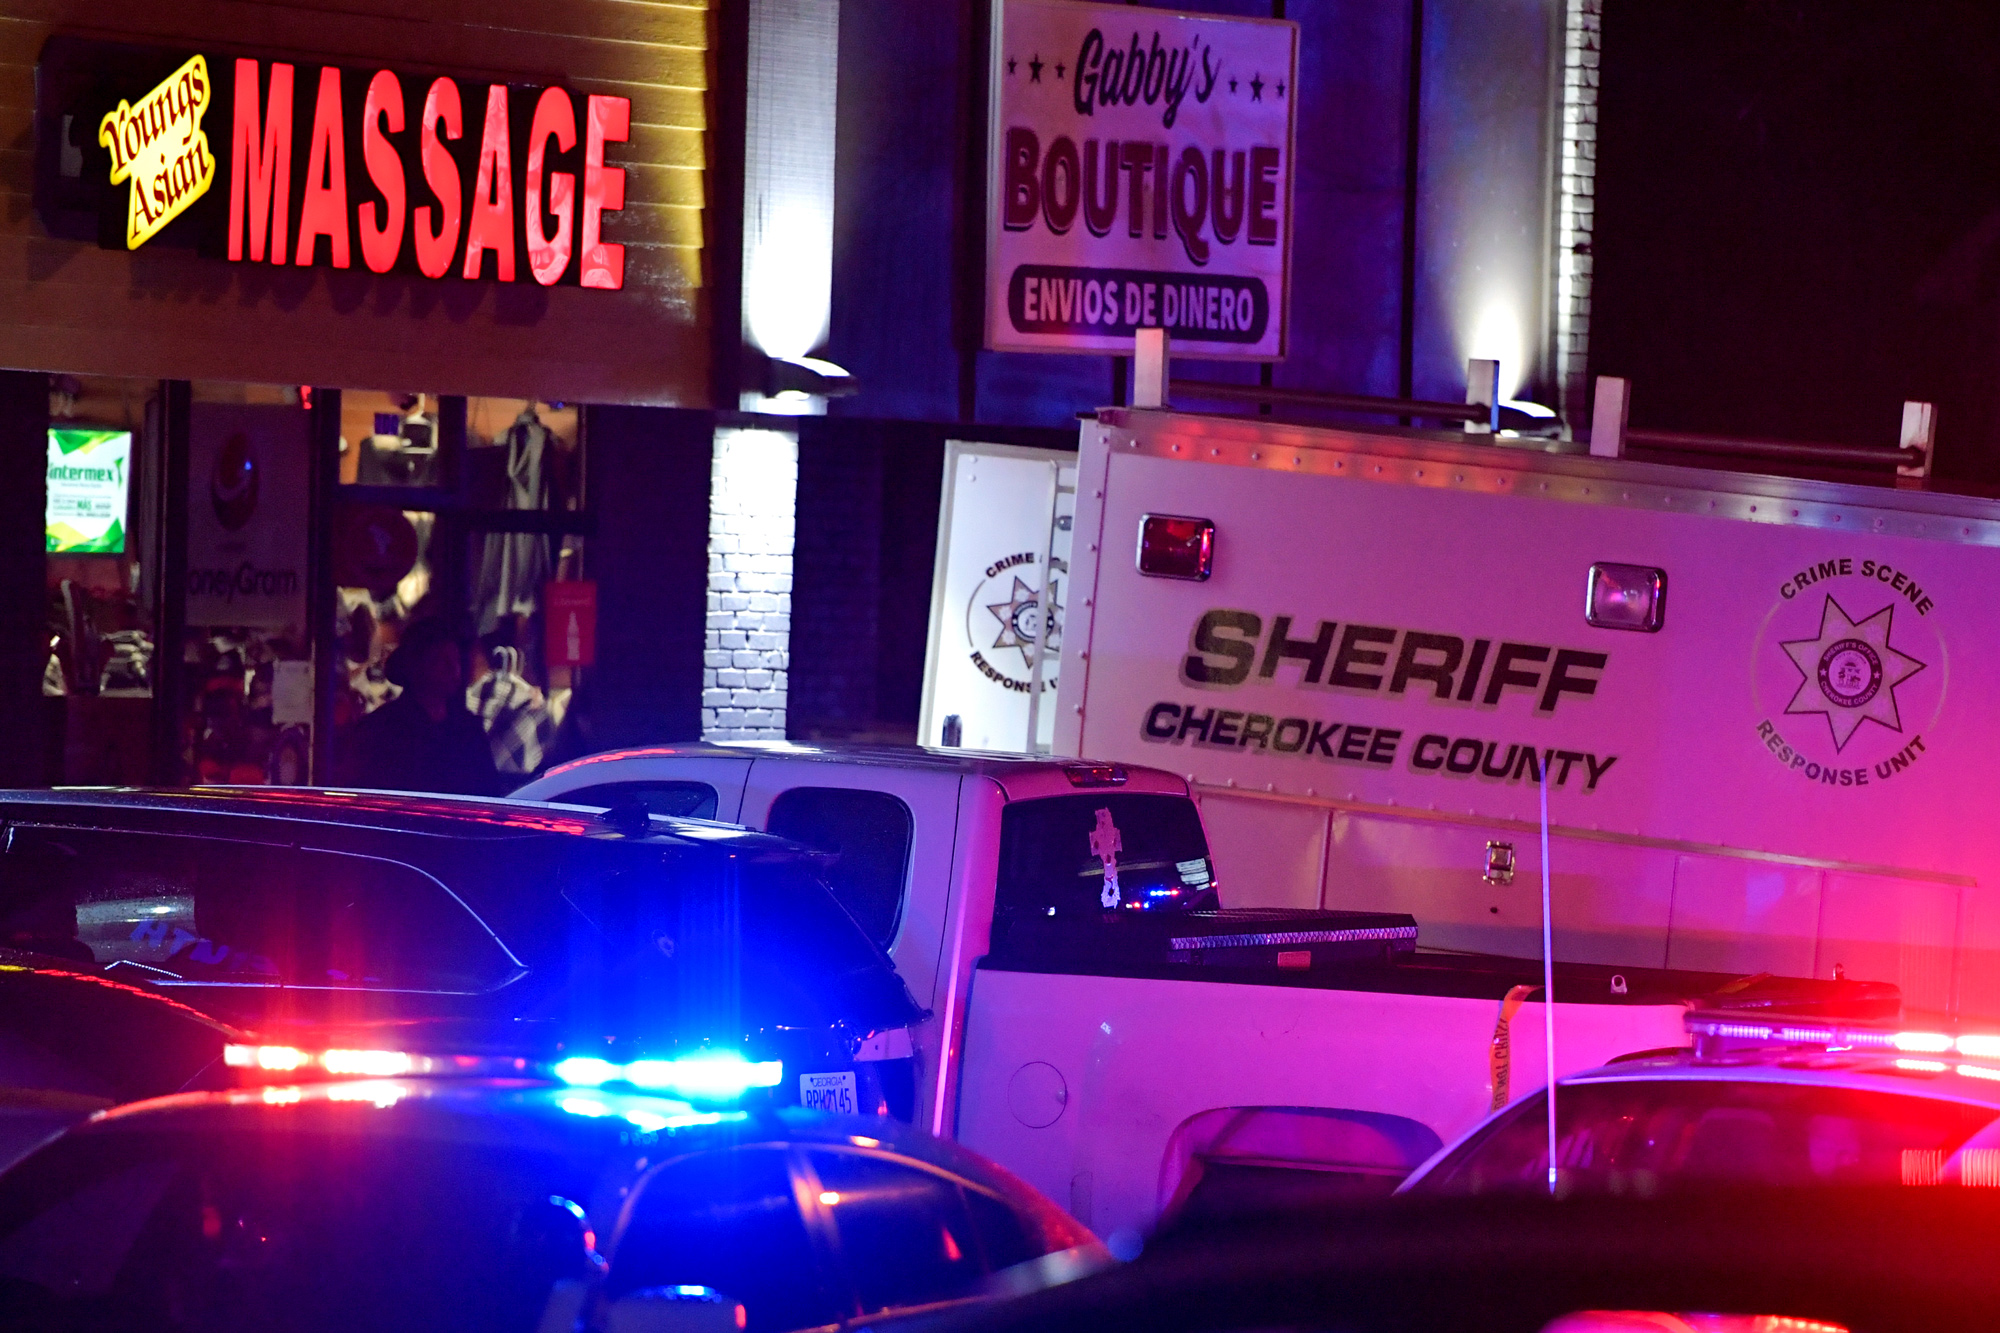 Emergency services attend the scene of a fatal shooting in Acworth, Georgia, U.S., on March 16.